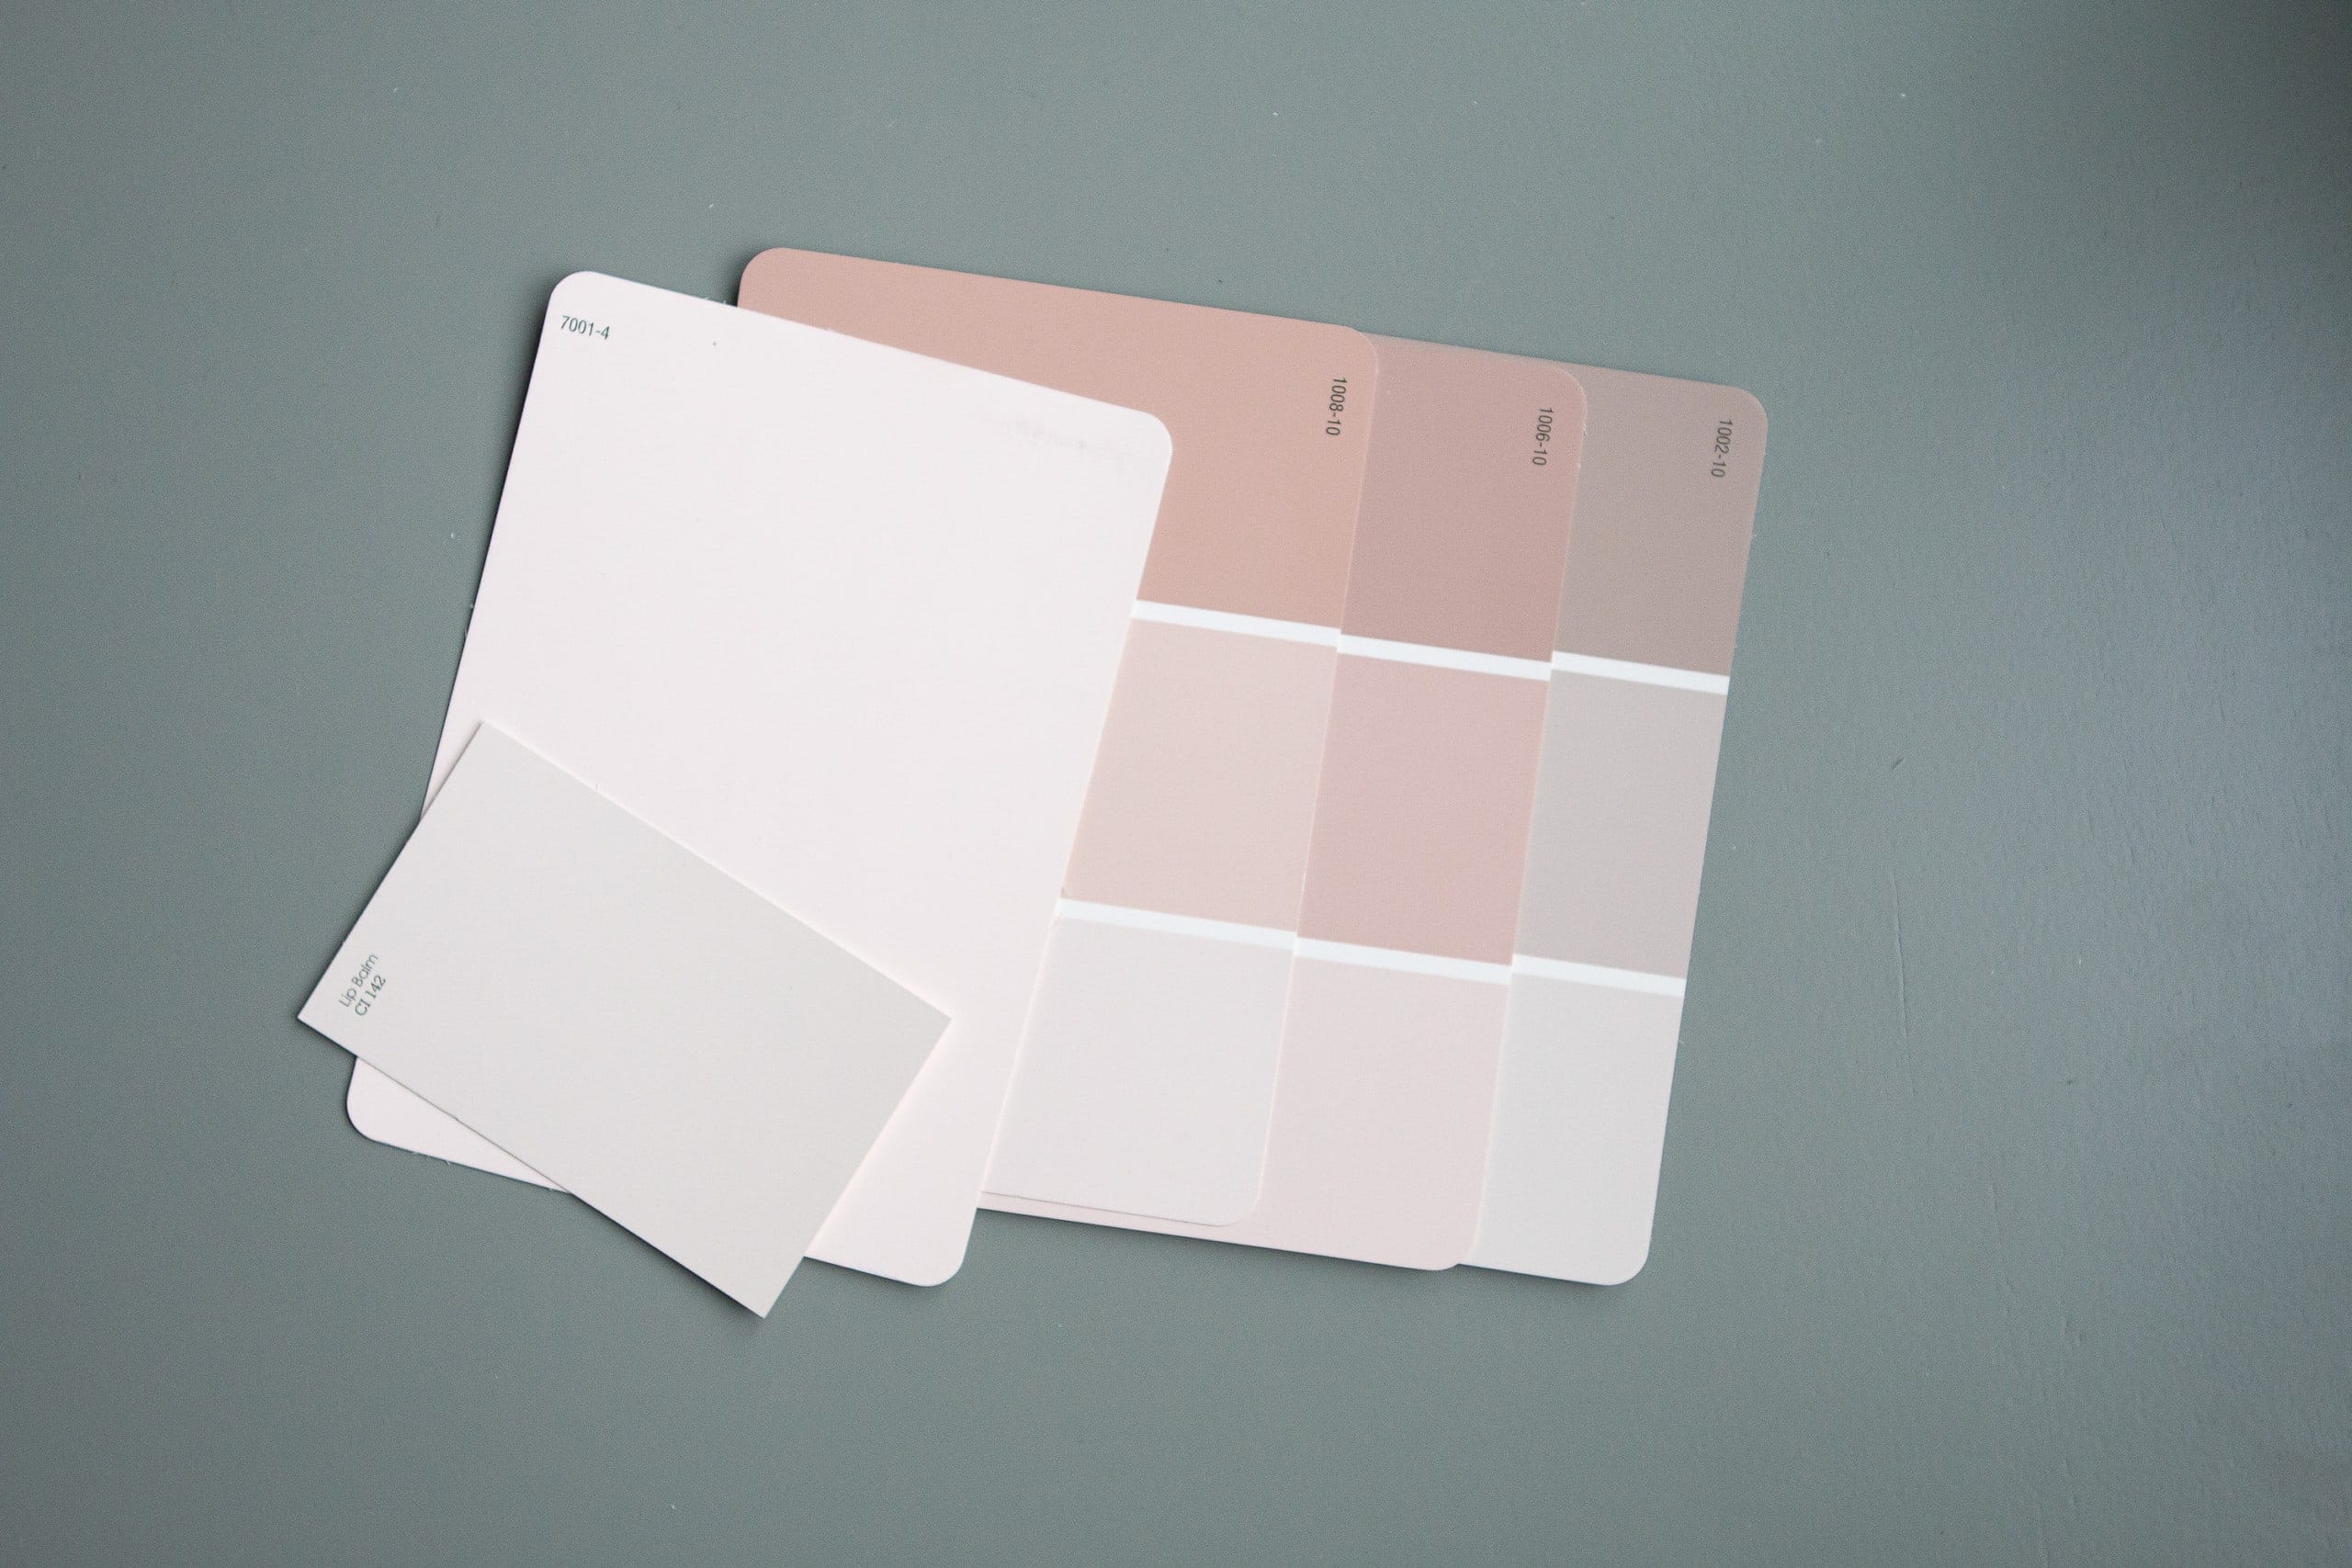 Looking at paint swatches to choose a paint color